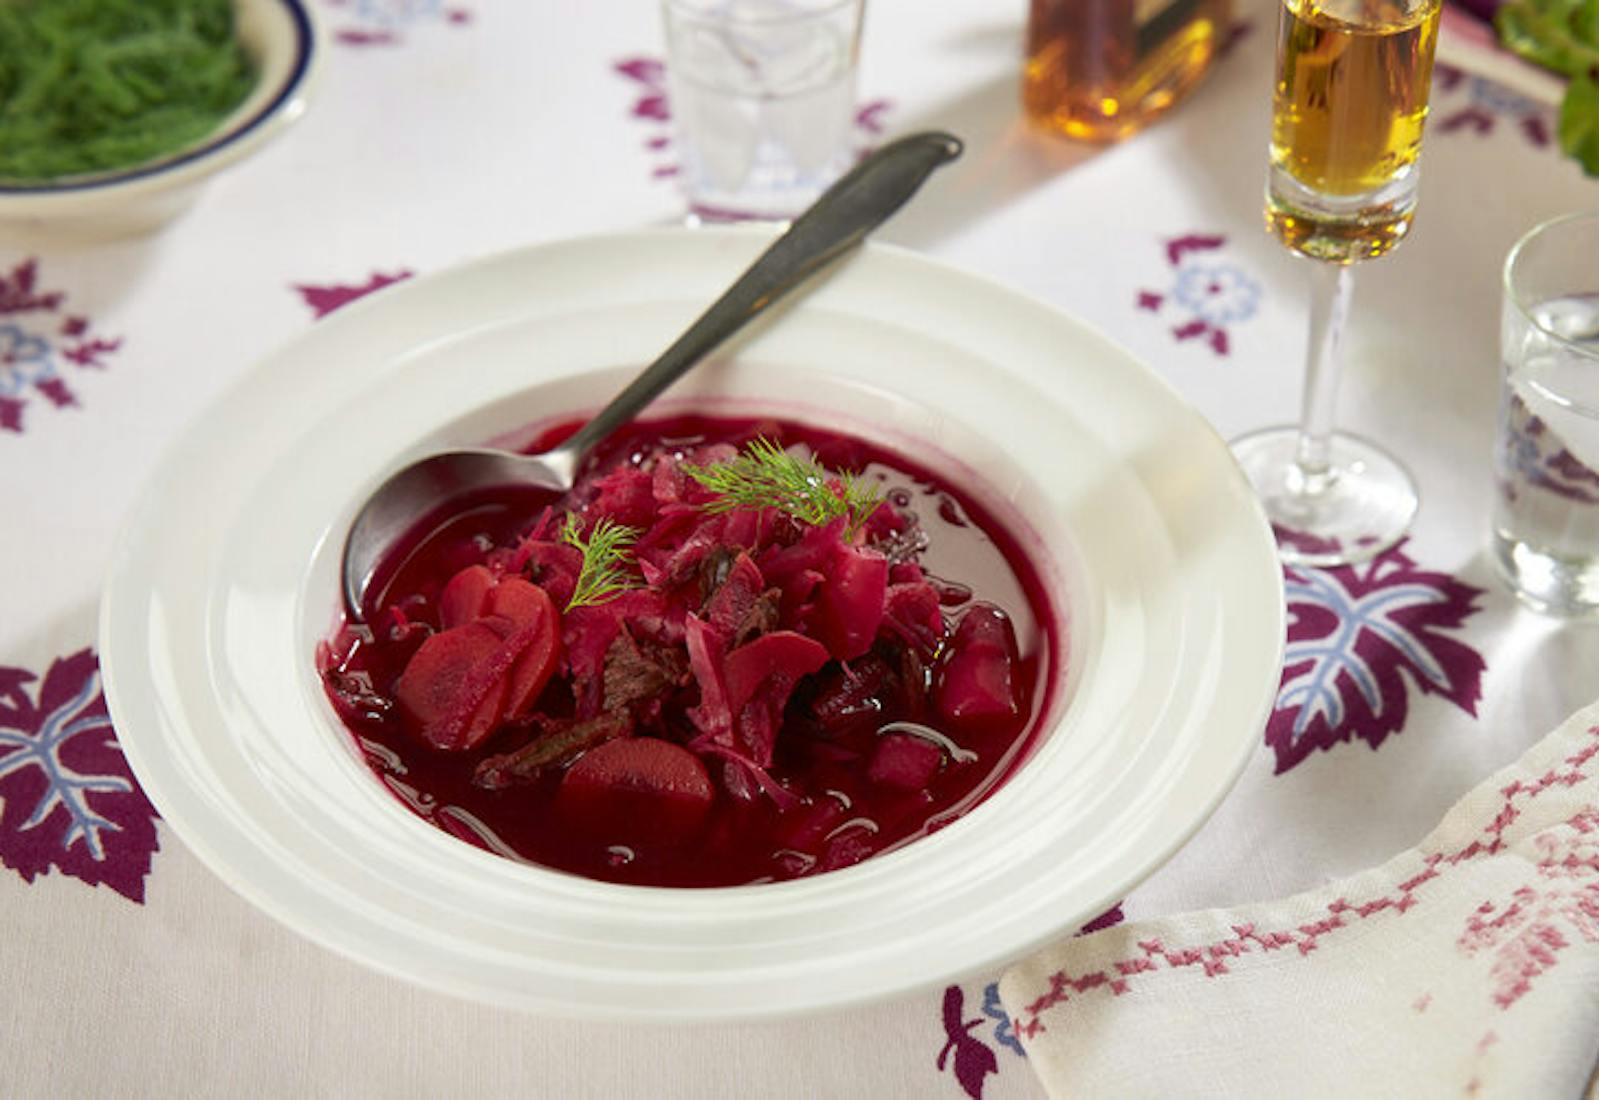 Borscht with sprigs of dill alongside liquor in champagne flute atop purple and white tablecloth.